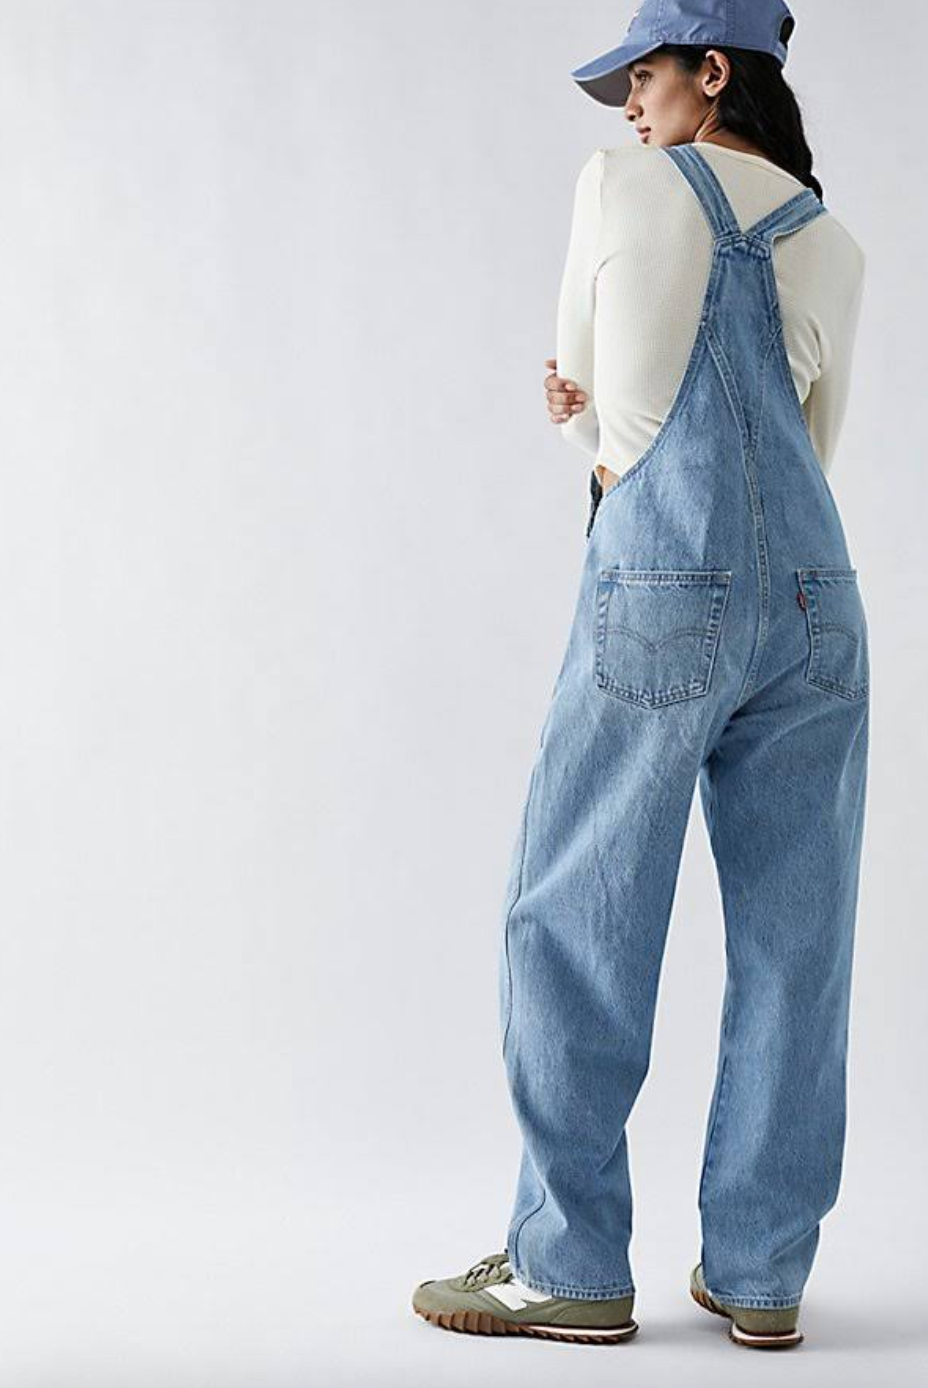 Levi's Vintage Overalls - What A Delight